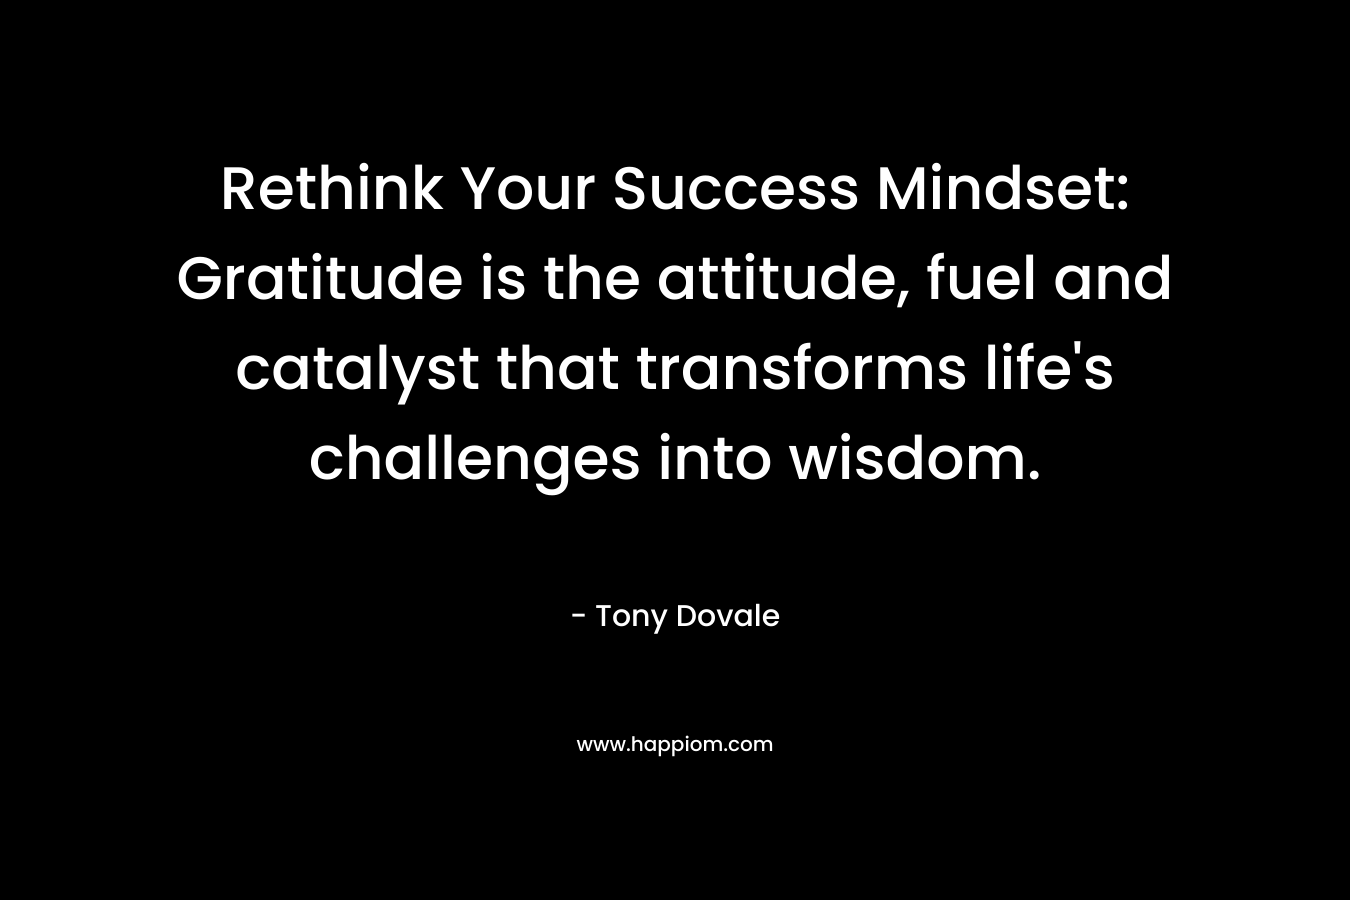 Rethink Your Success Mindset: Gratitude is the attitude, fuel and catalyst that transforms life's challenges into wisdom.